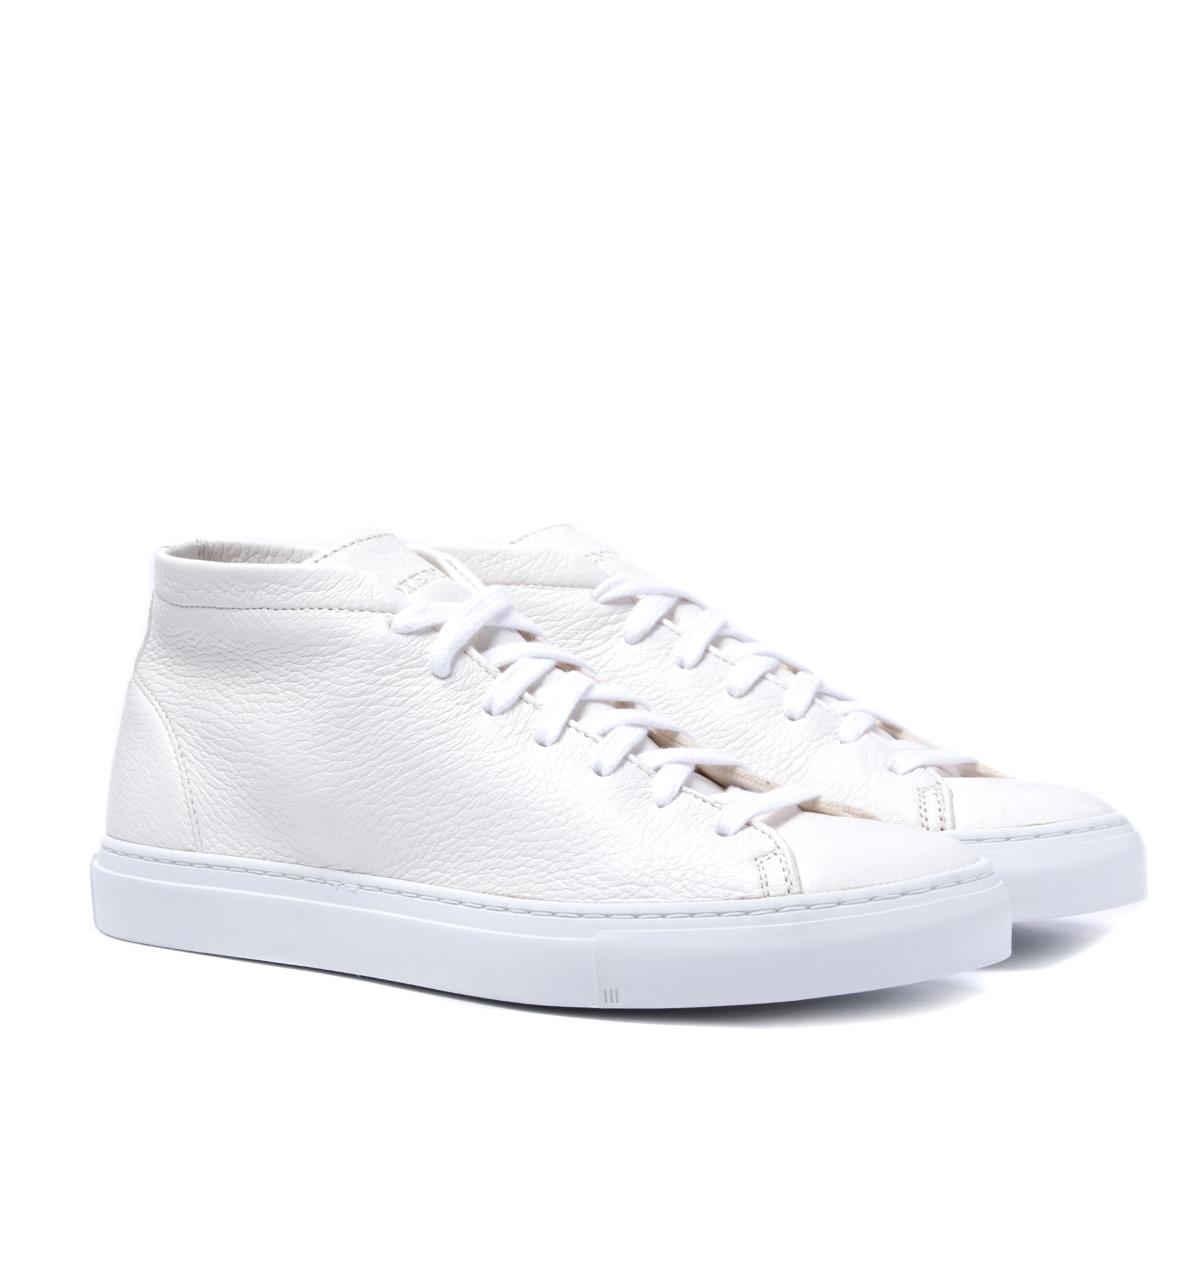 Diemme Leather Loria White Deer Nappa Trainers for Men - Lyst